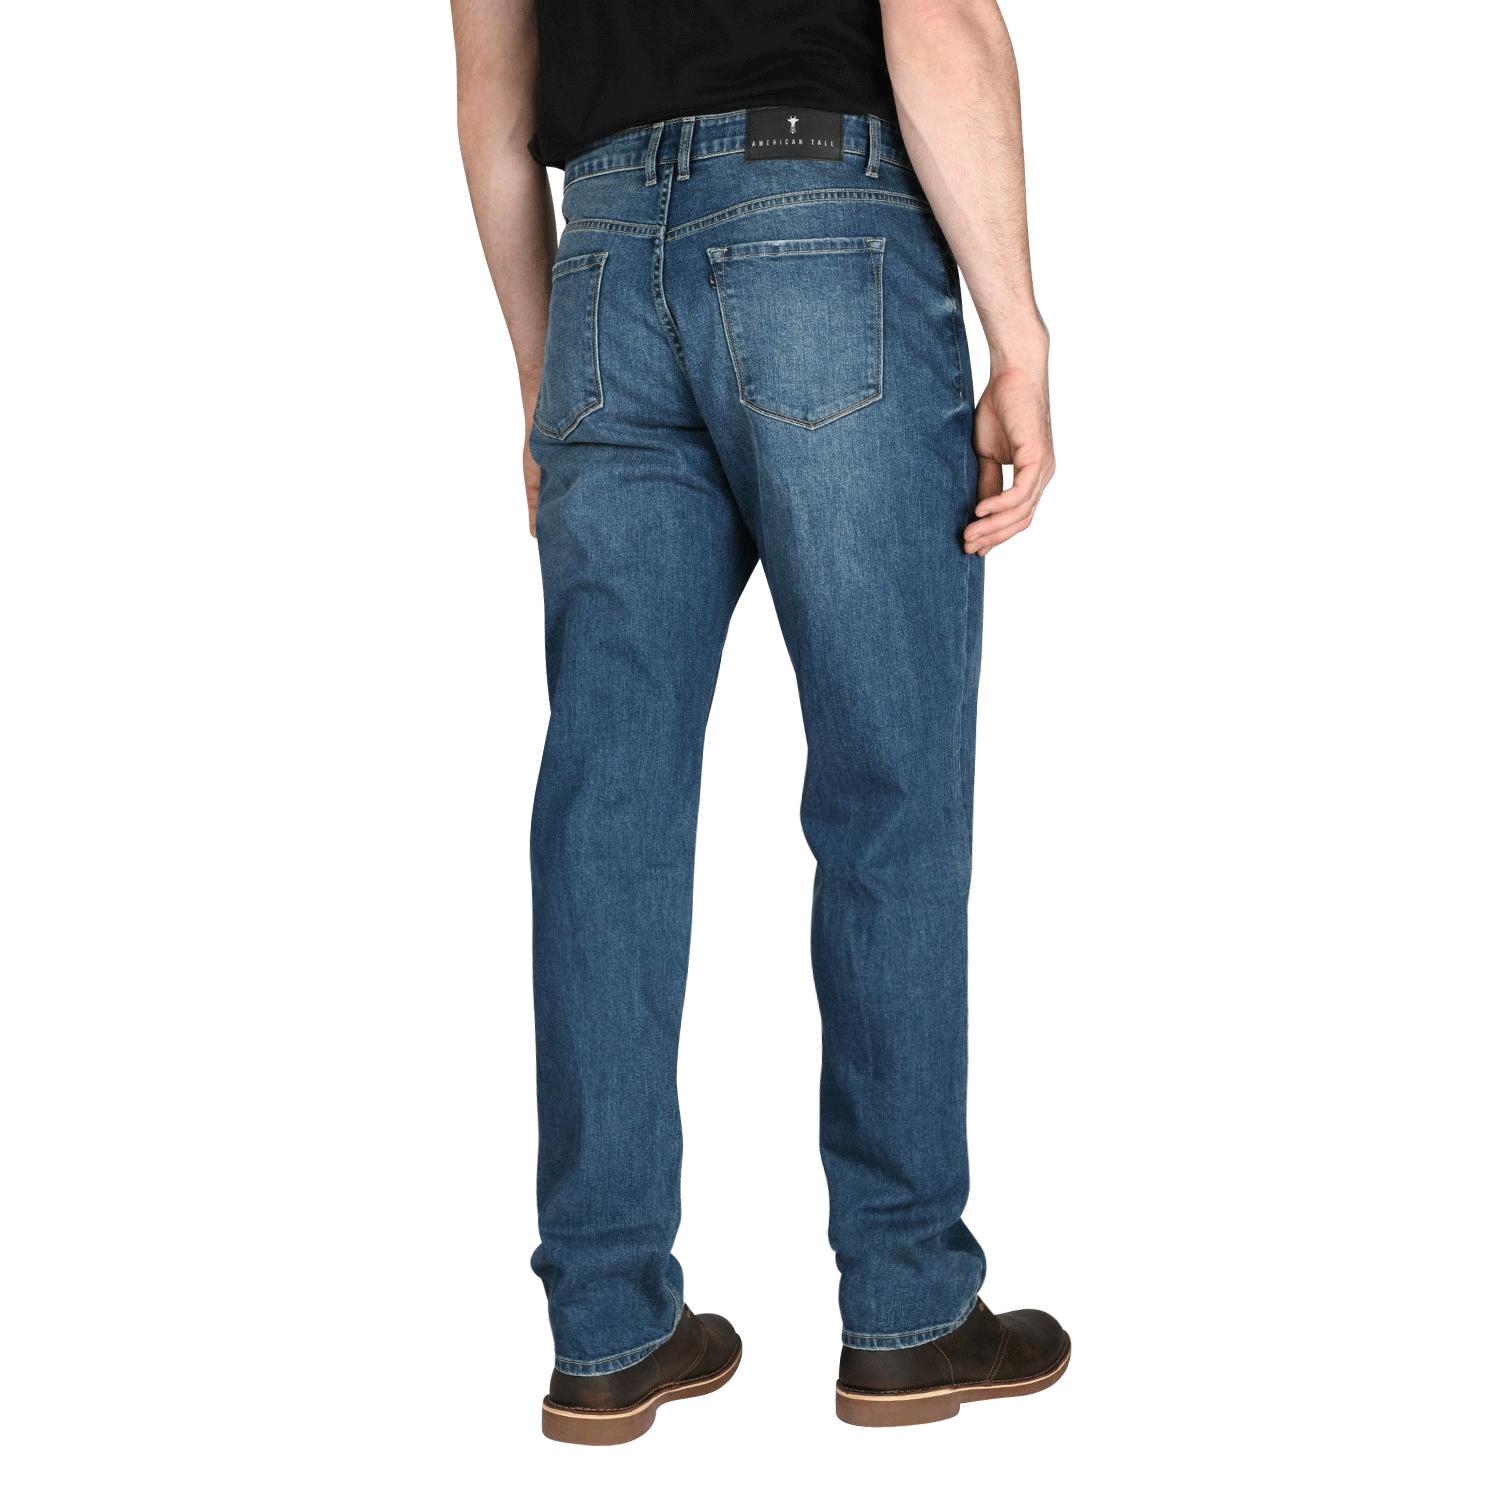 Mason SEMI-RELAXED Men's Tall Jeans in Signature Fade